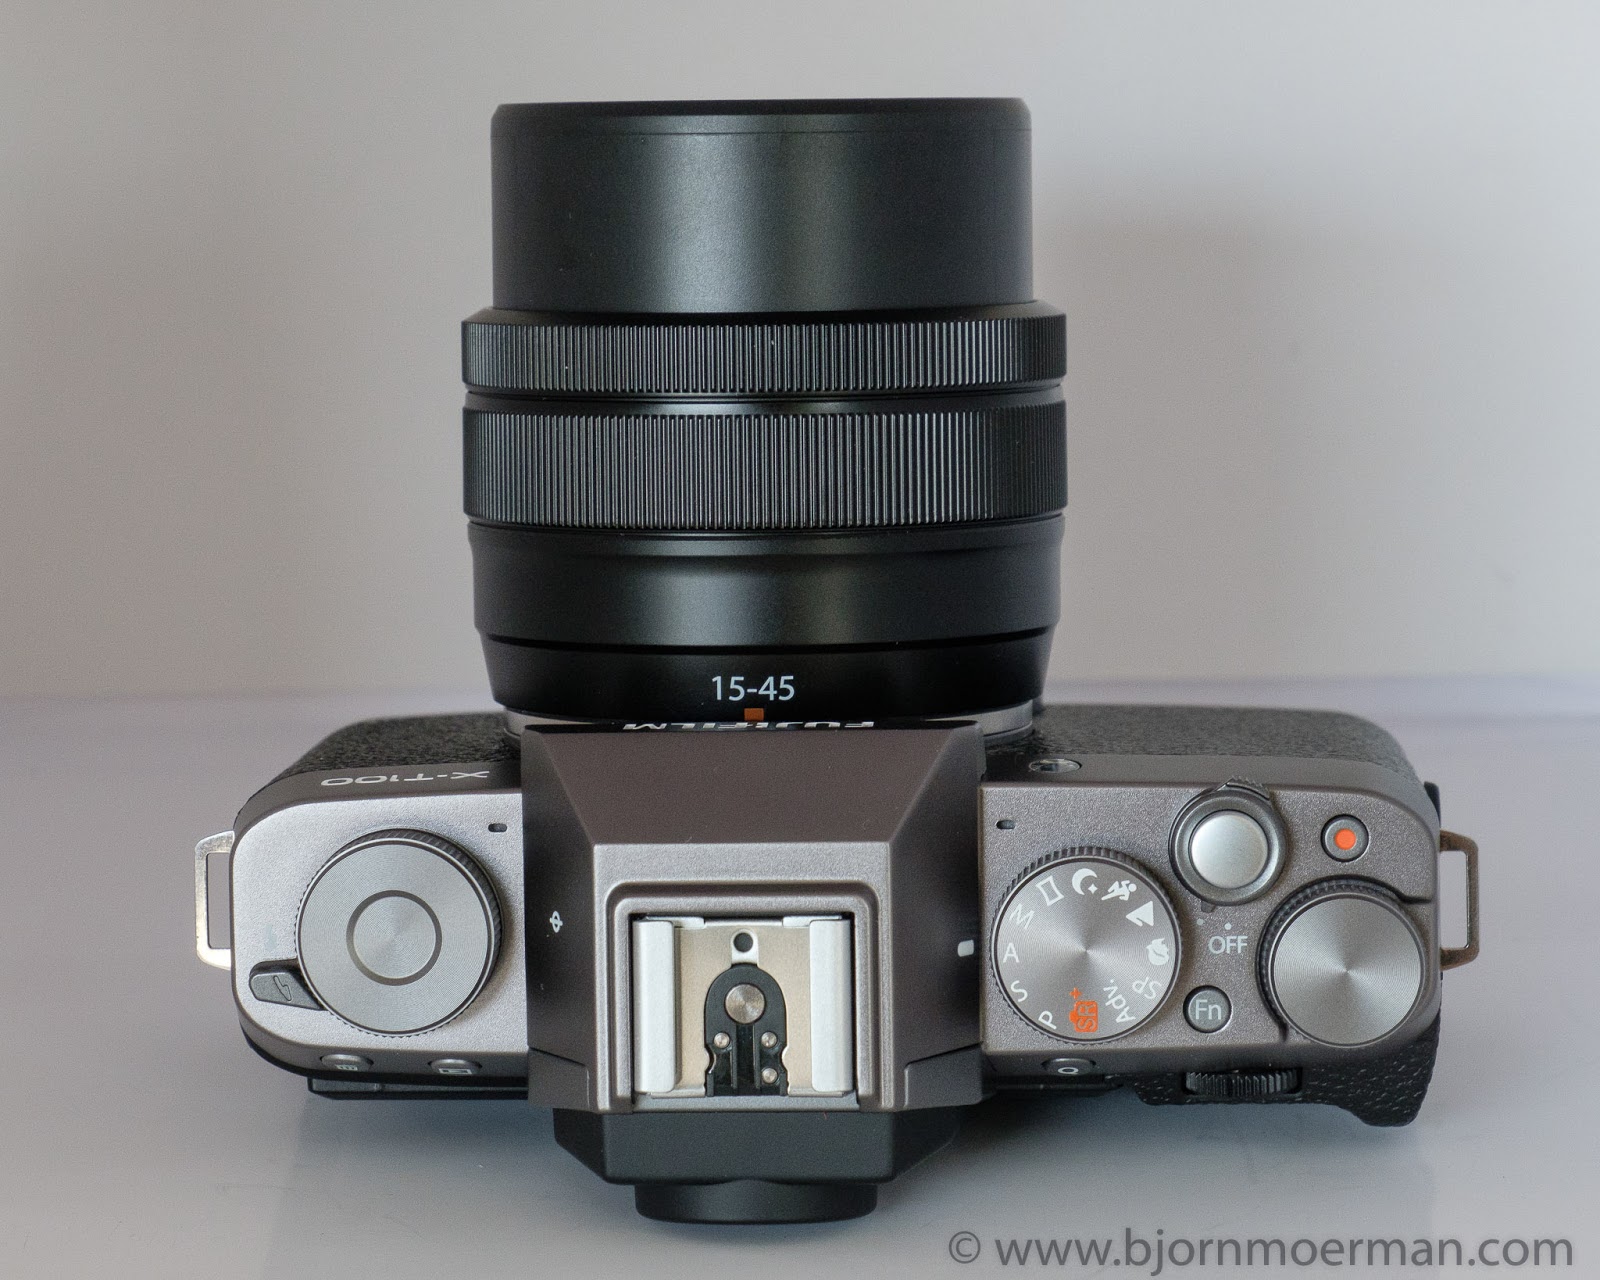 FIRST LOOK REVIEW FUJIFILM X-T100 and XC 15-45mm LENS